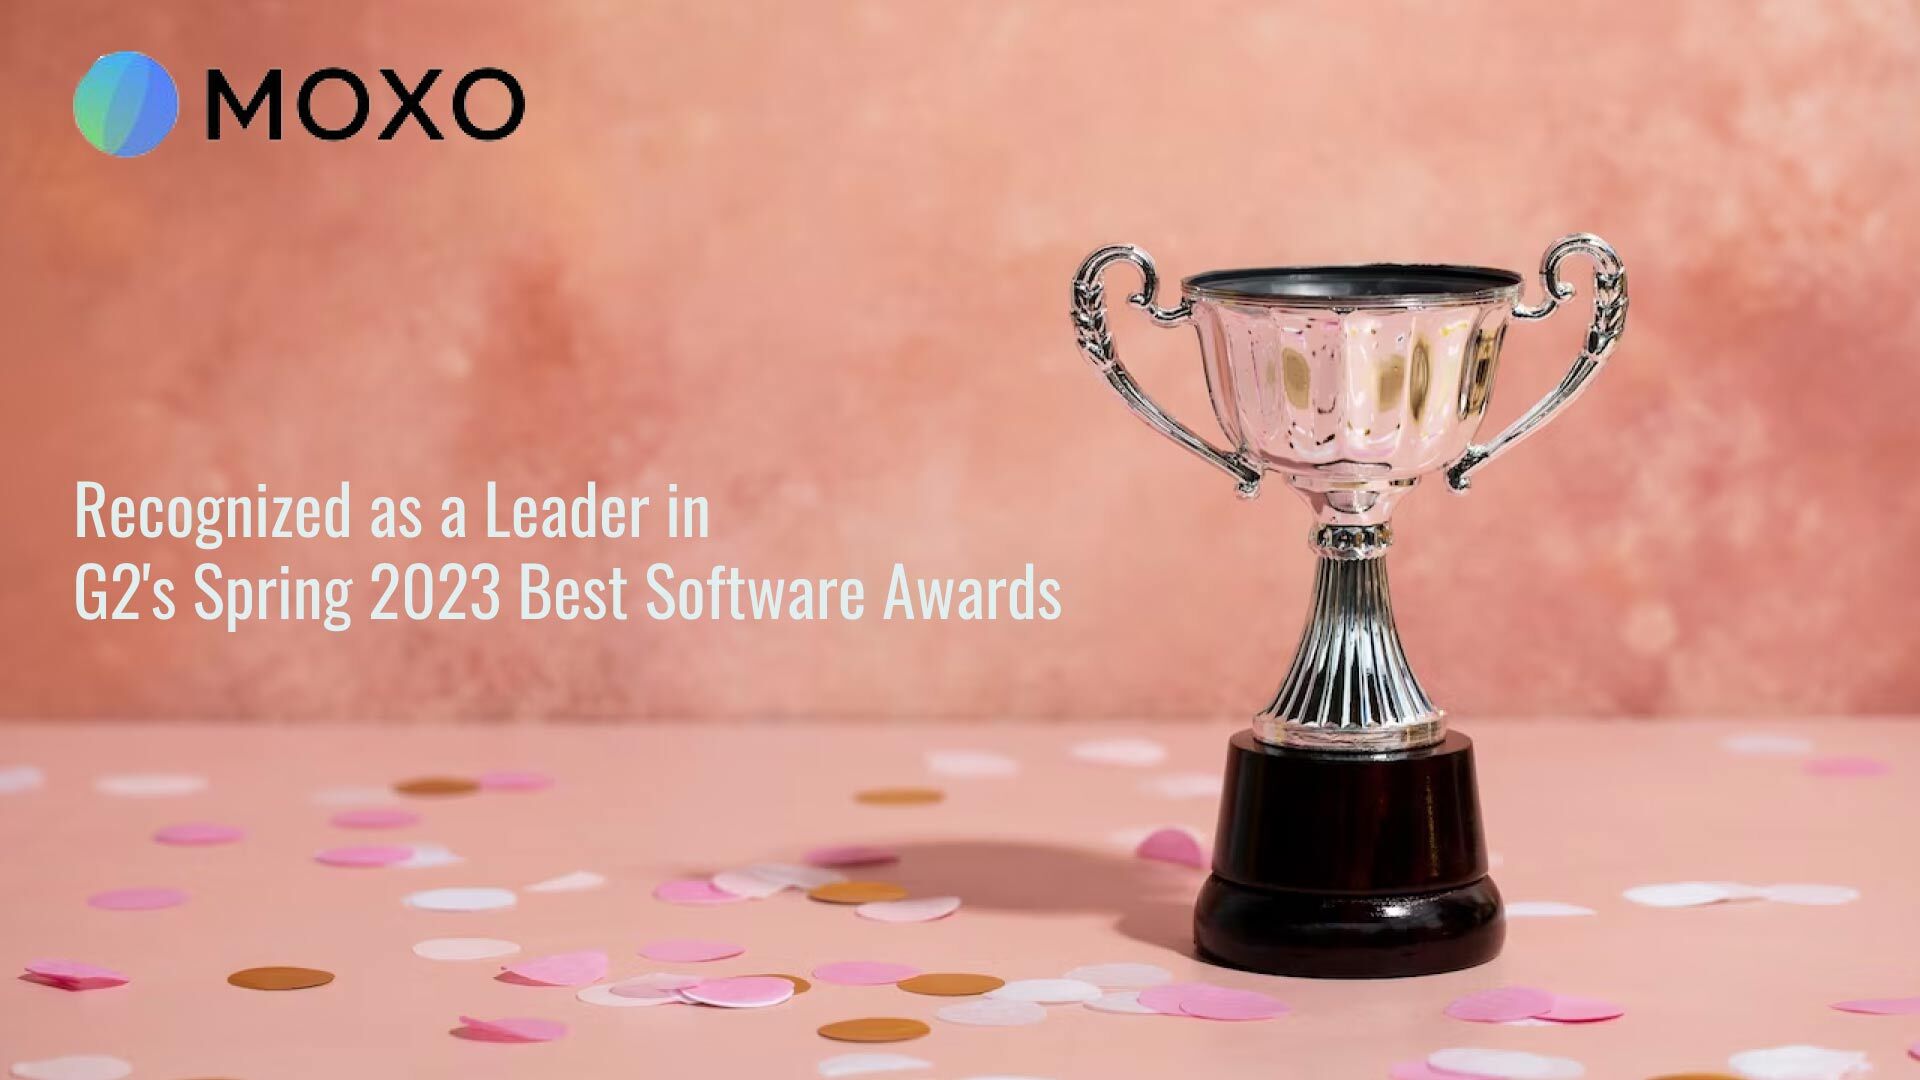 Moxo Recognized as a Leader in G2's Spring 2023 Best Software Awards